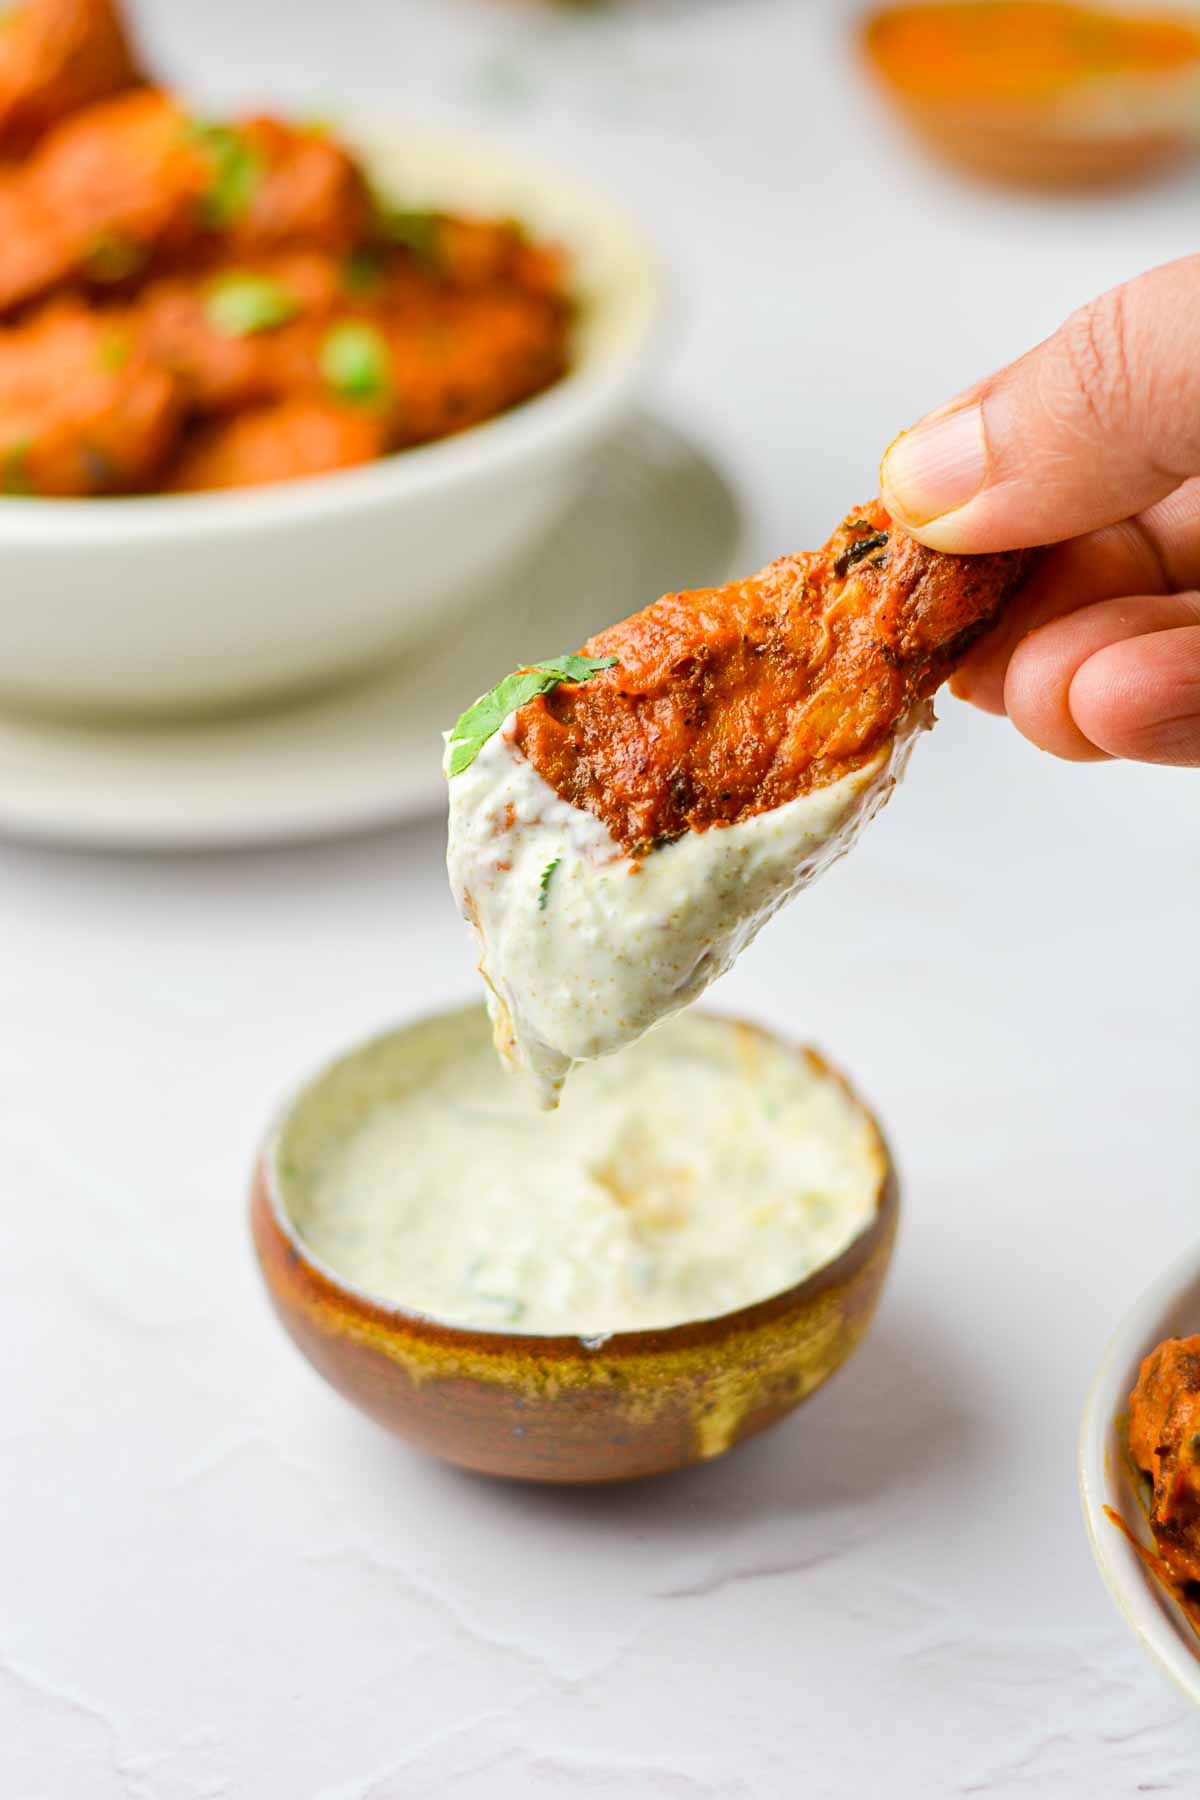 Butter chicken wing that was dipped into a creamy yogurt sauce being held up by a hand with a bowl of butter chicken wings in the background